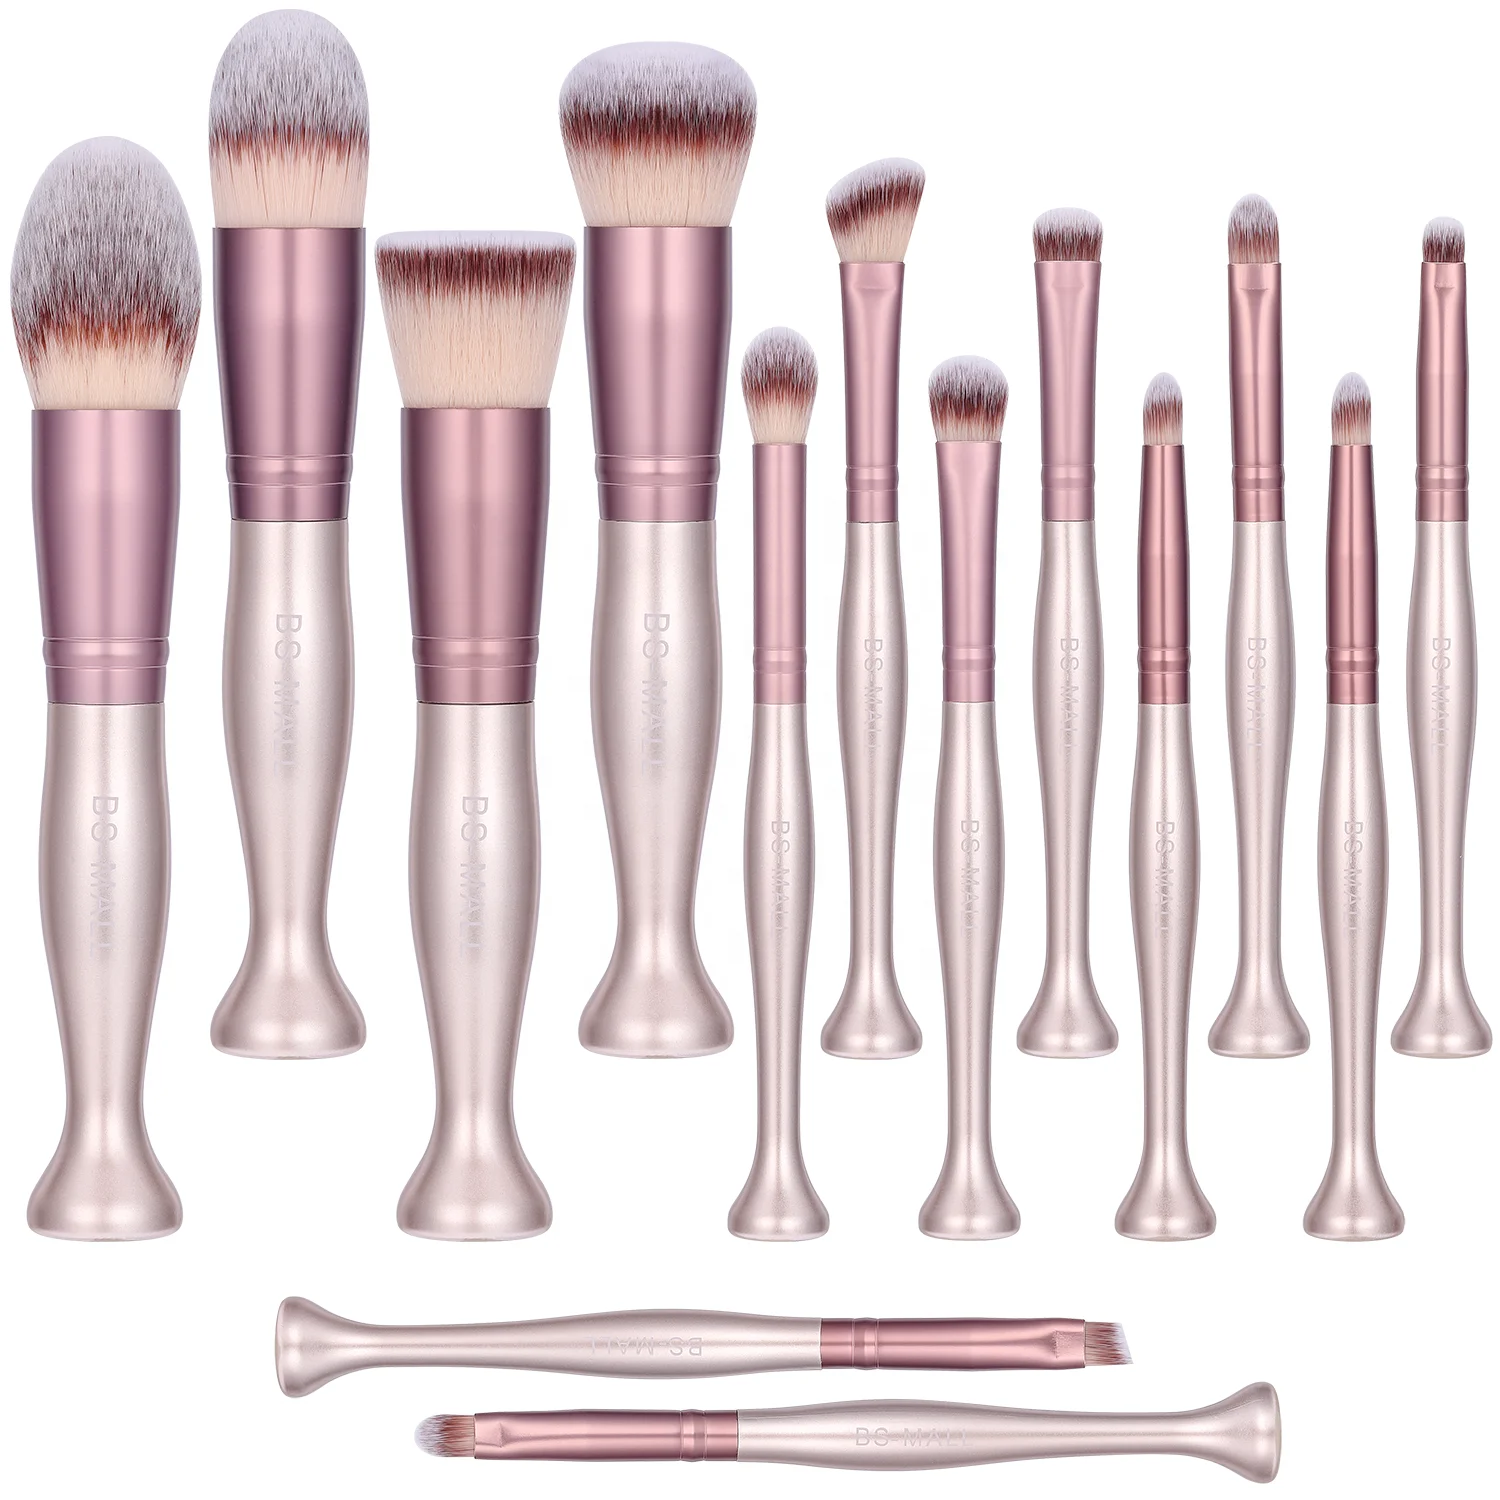 

BS-MALL 14PCS Rose Gold Makeup Brushes Vegan Synthetic Stand Up Makeup Brushes 2021 Private Label Make up Brush Set, Rose gold/custom logo